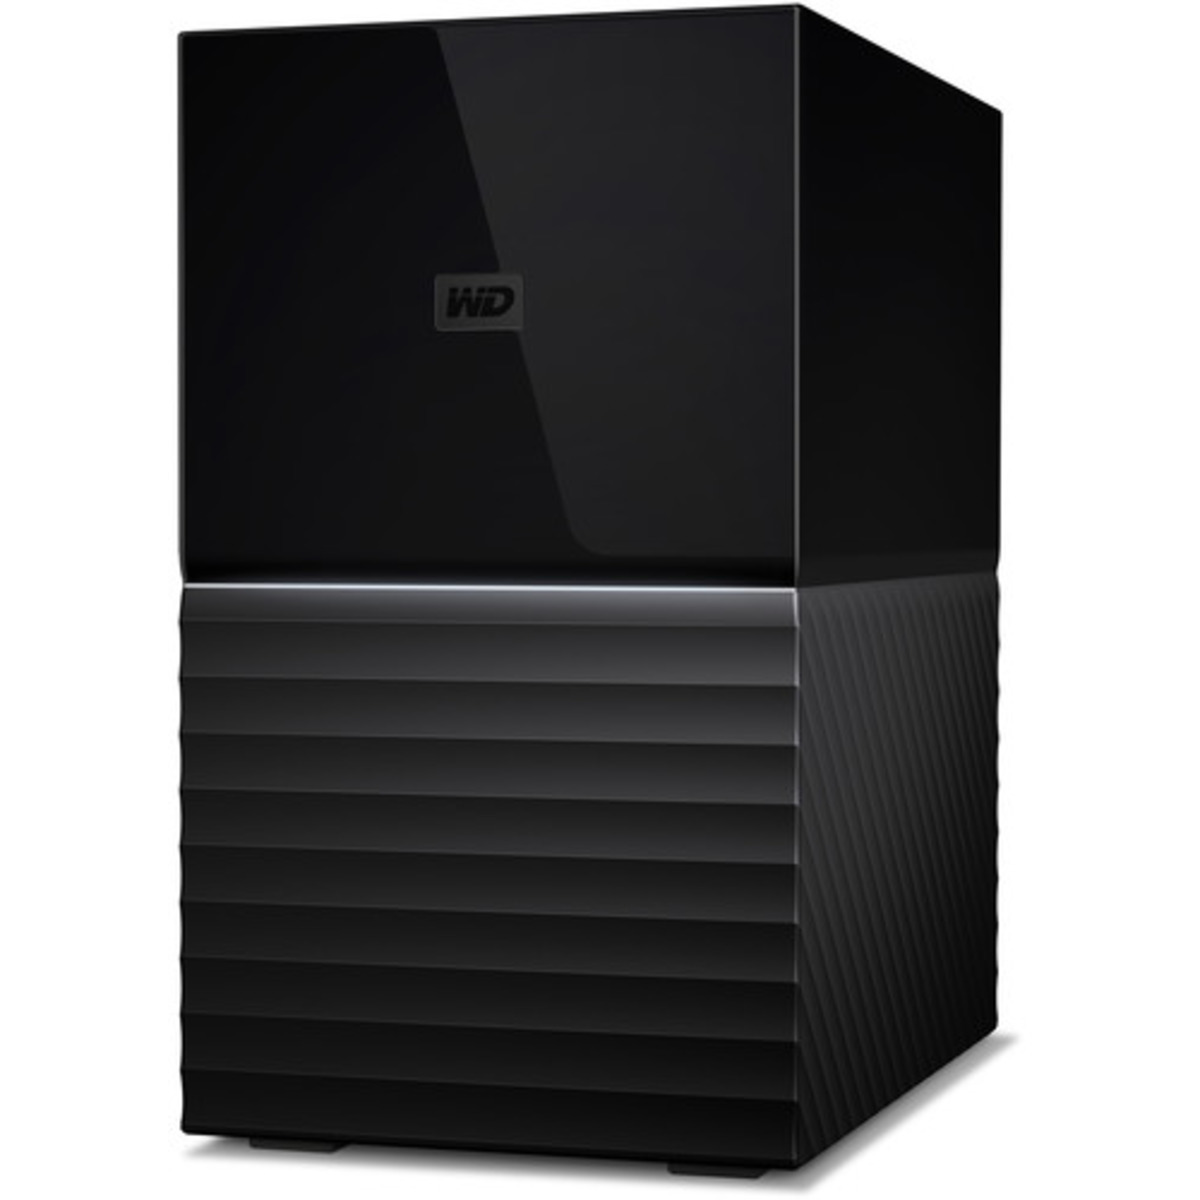 Western Digital My Book DUO Gen 2 8tb 2-Bay Desktop Personal / Basic Home / Small Office DAS - Direct Attached Storage Device 2x4tb Western Digital Red Pro WD4003FFBX 3.5 7200rpm SATA 6Gb/s HDD NAS Class Drives Installed - Burn-In Tested - ON SALE My Book DUO Gen 2